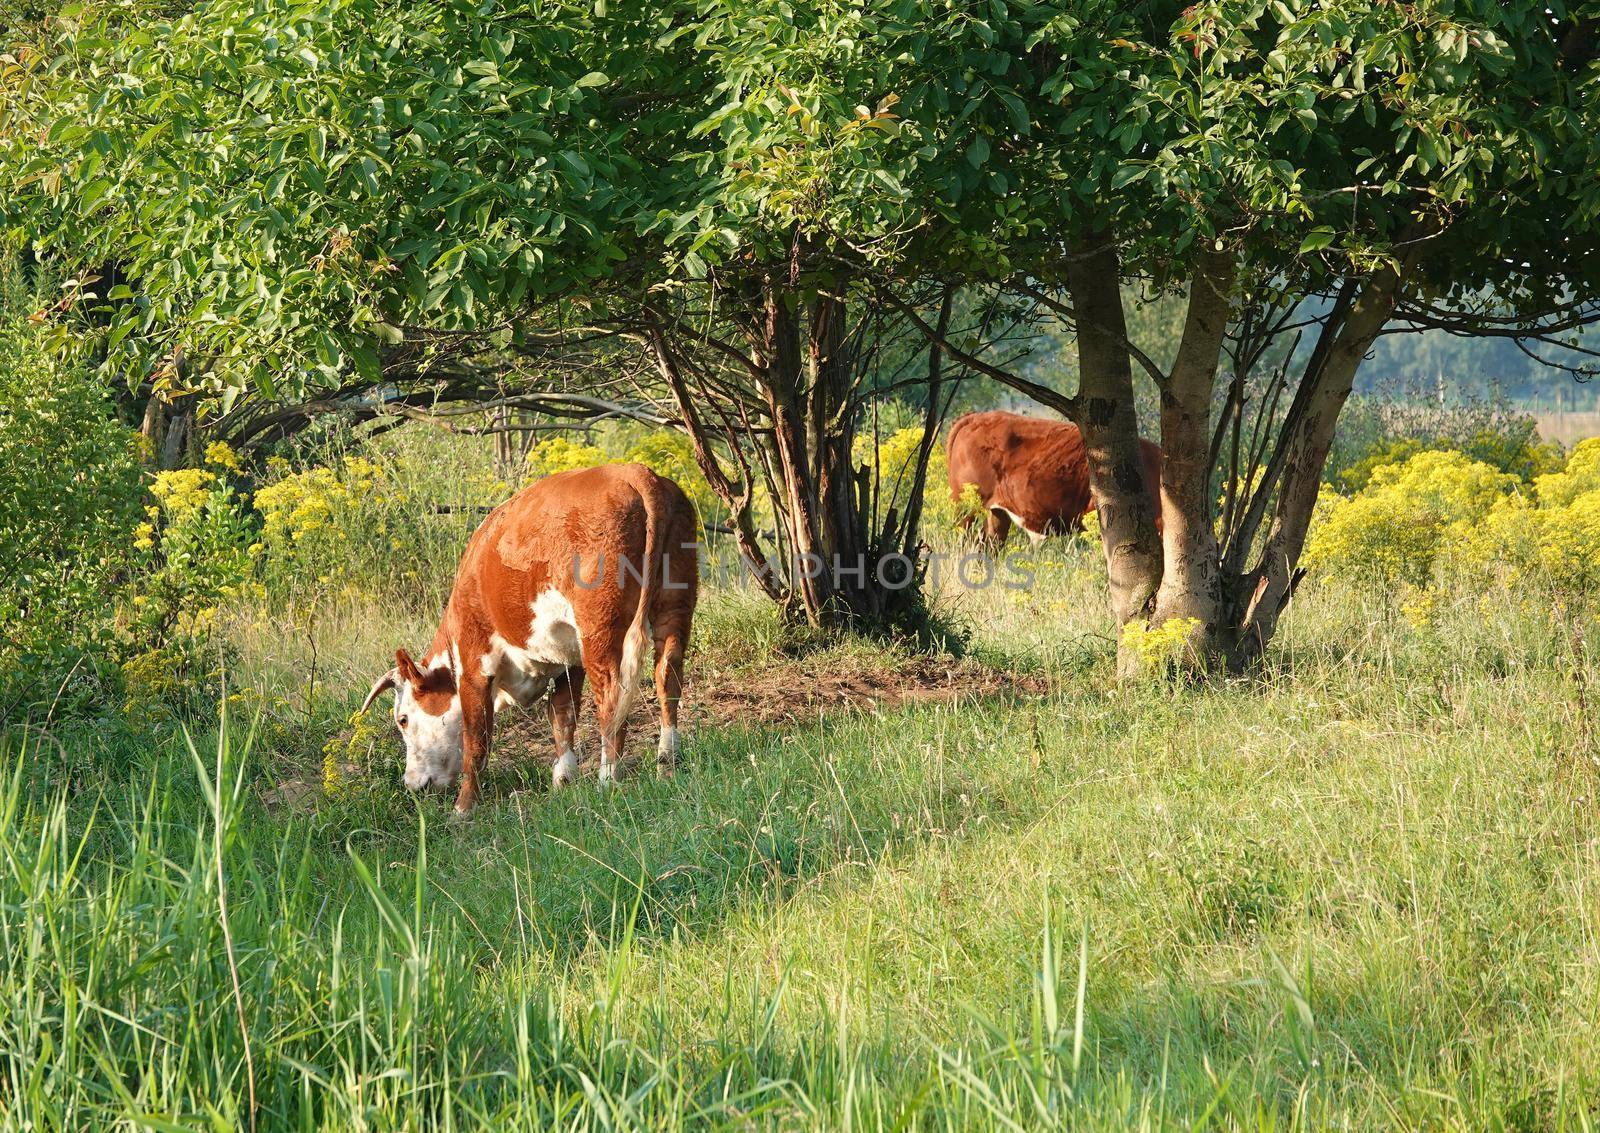 Conservation grazing is the method of using livestock grazing to enrich the natural diversity in these floodplains. These cows are probably Herefords, a race often used for this purpose